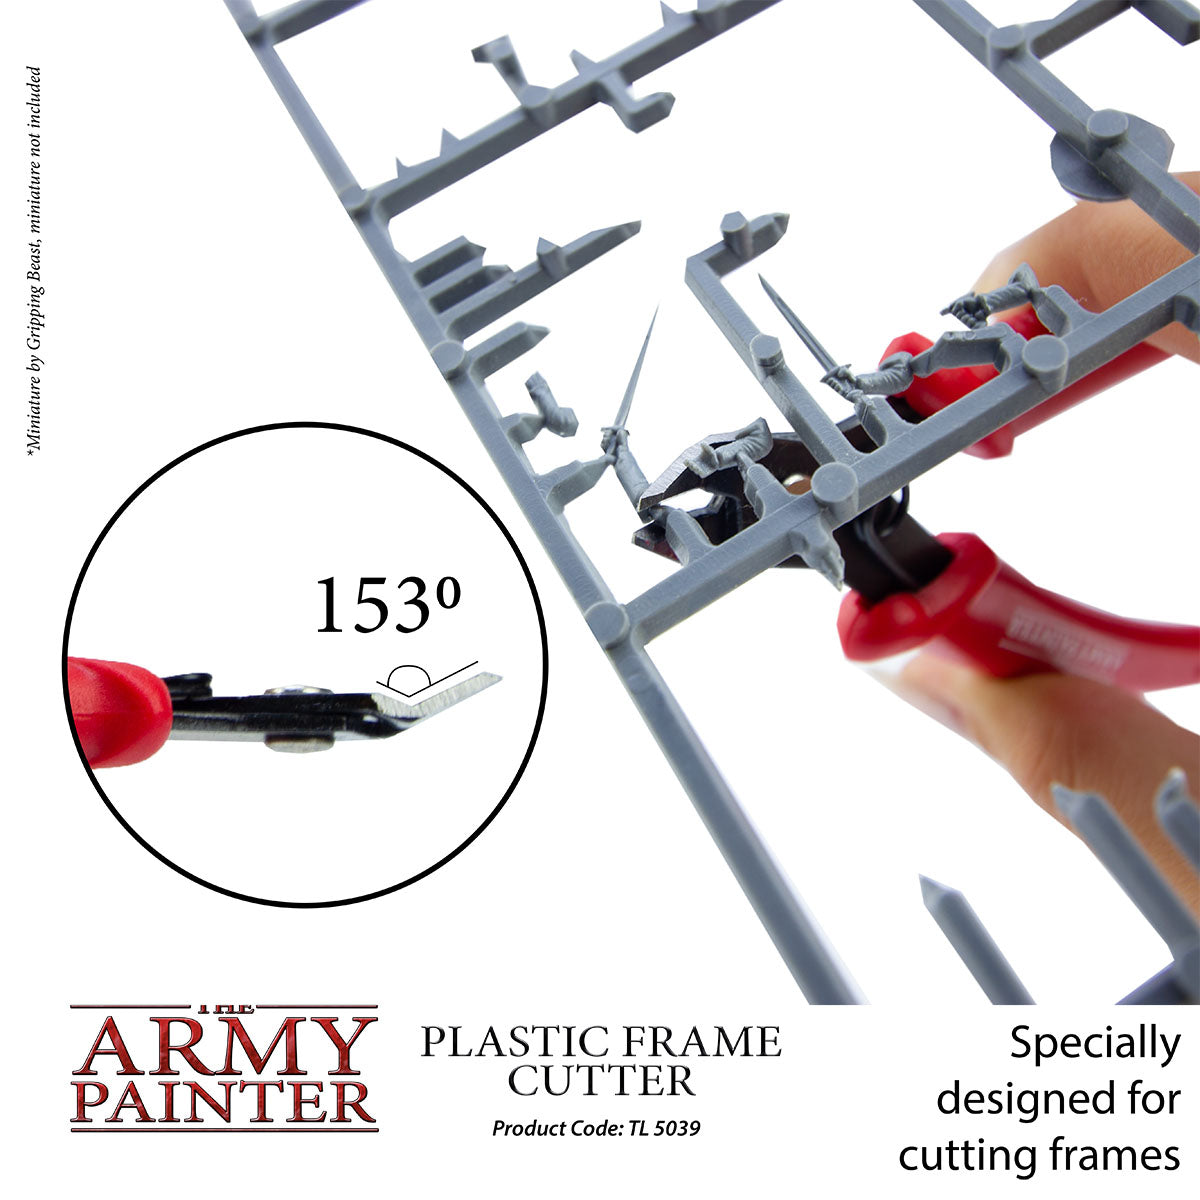 The Army Painter - Plastic Frame Cutter TL5039